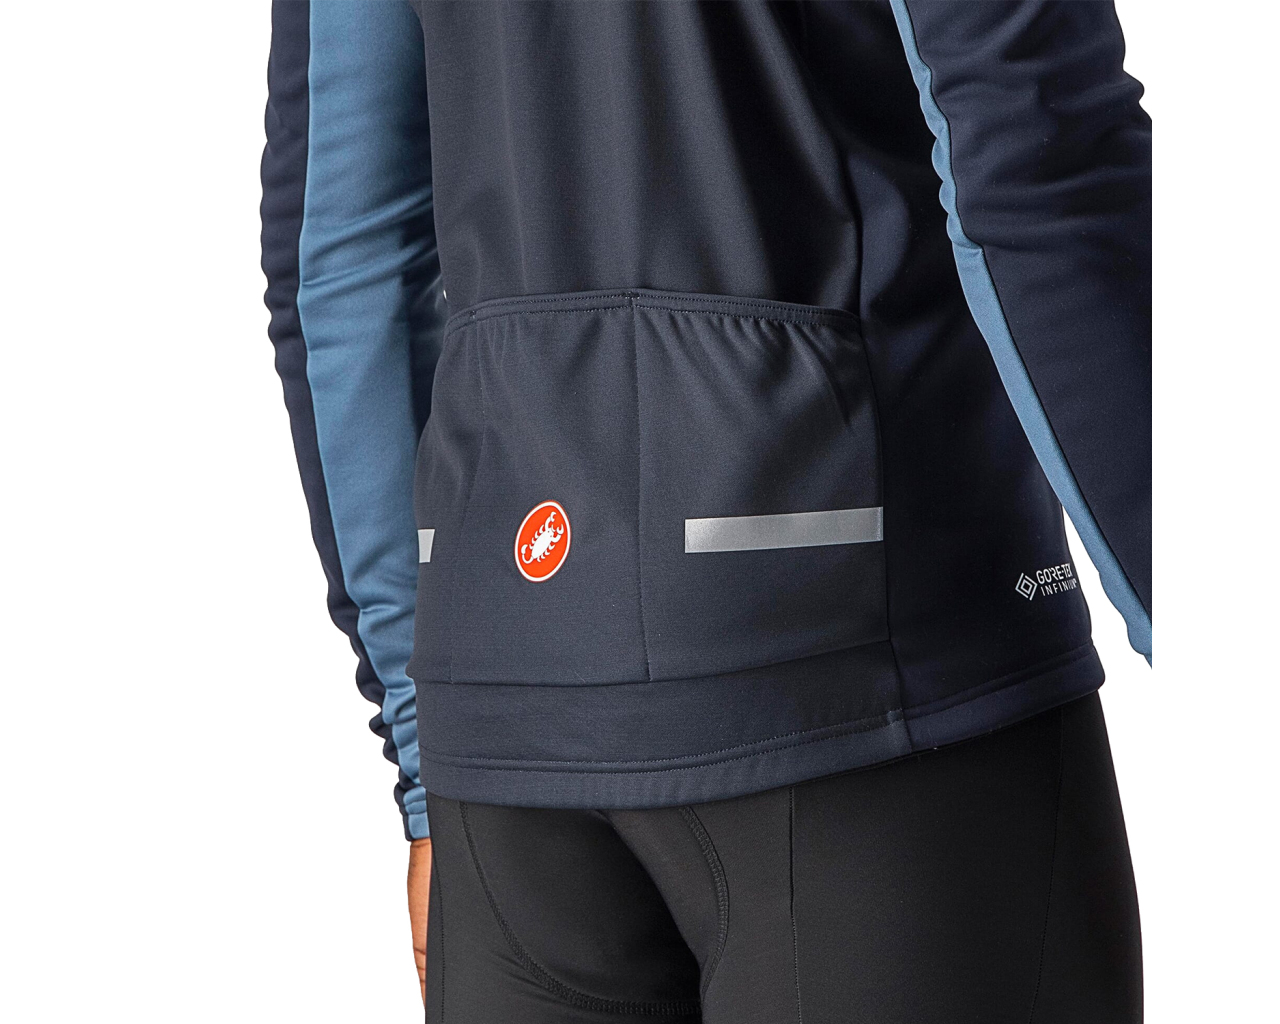 Castelli Mortirolo 6S Cycling Jacket - AW22 | Merlin Cycles